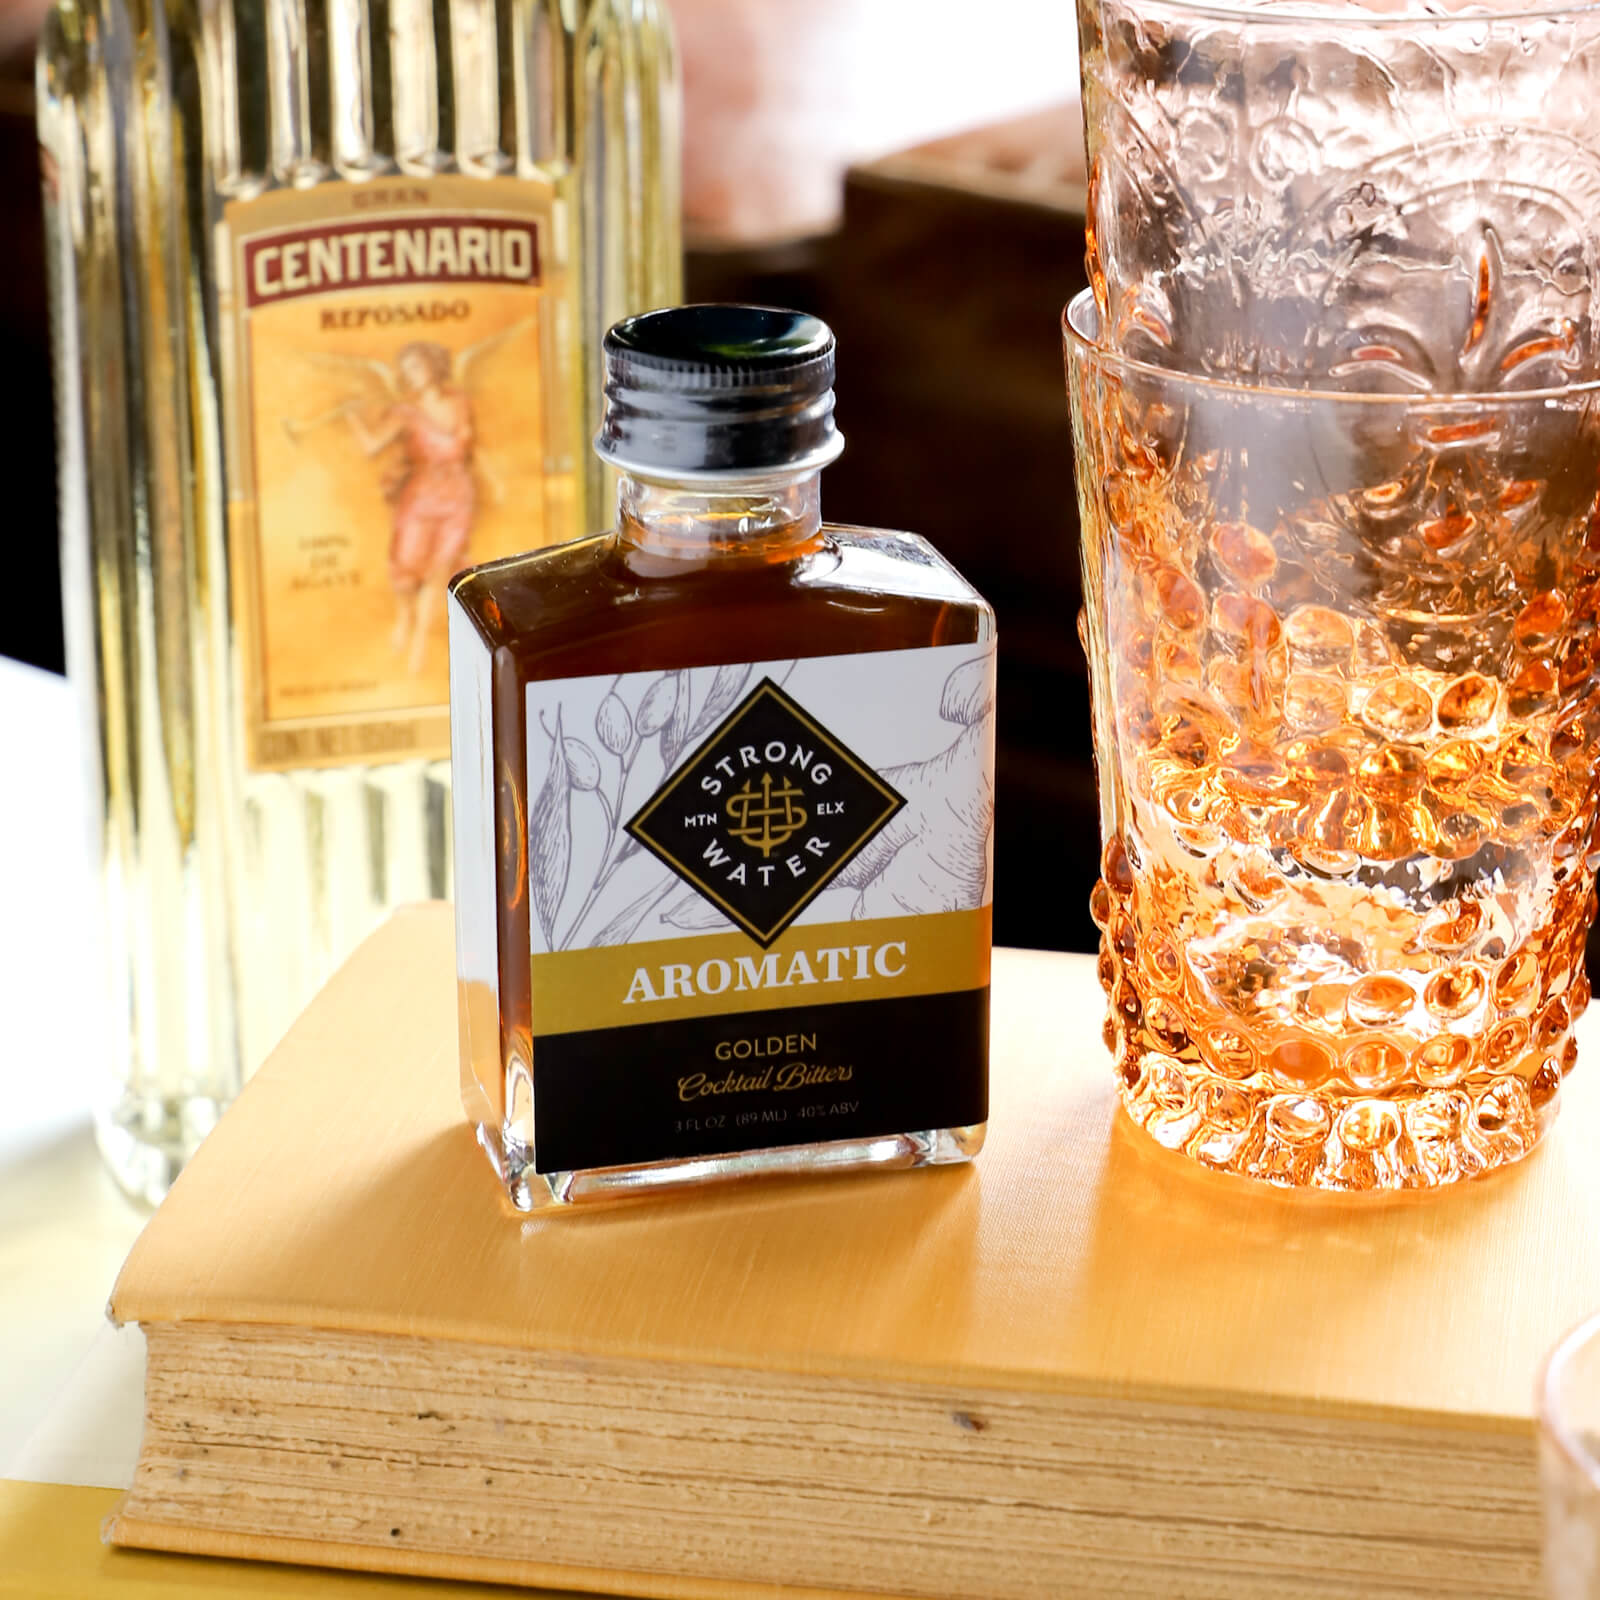 Strongwater Aromatic Golden Cocktail Bitters